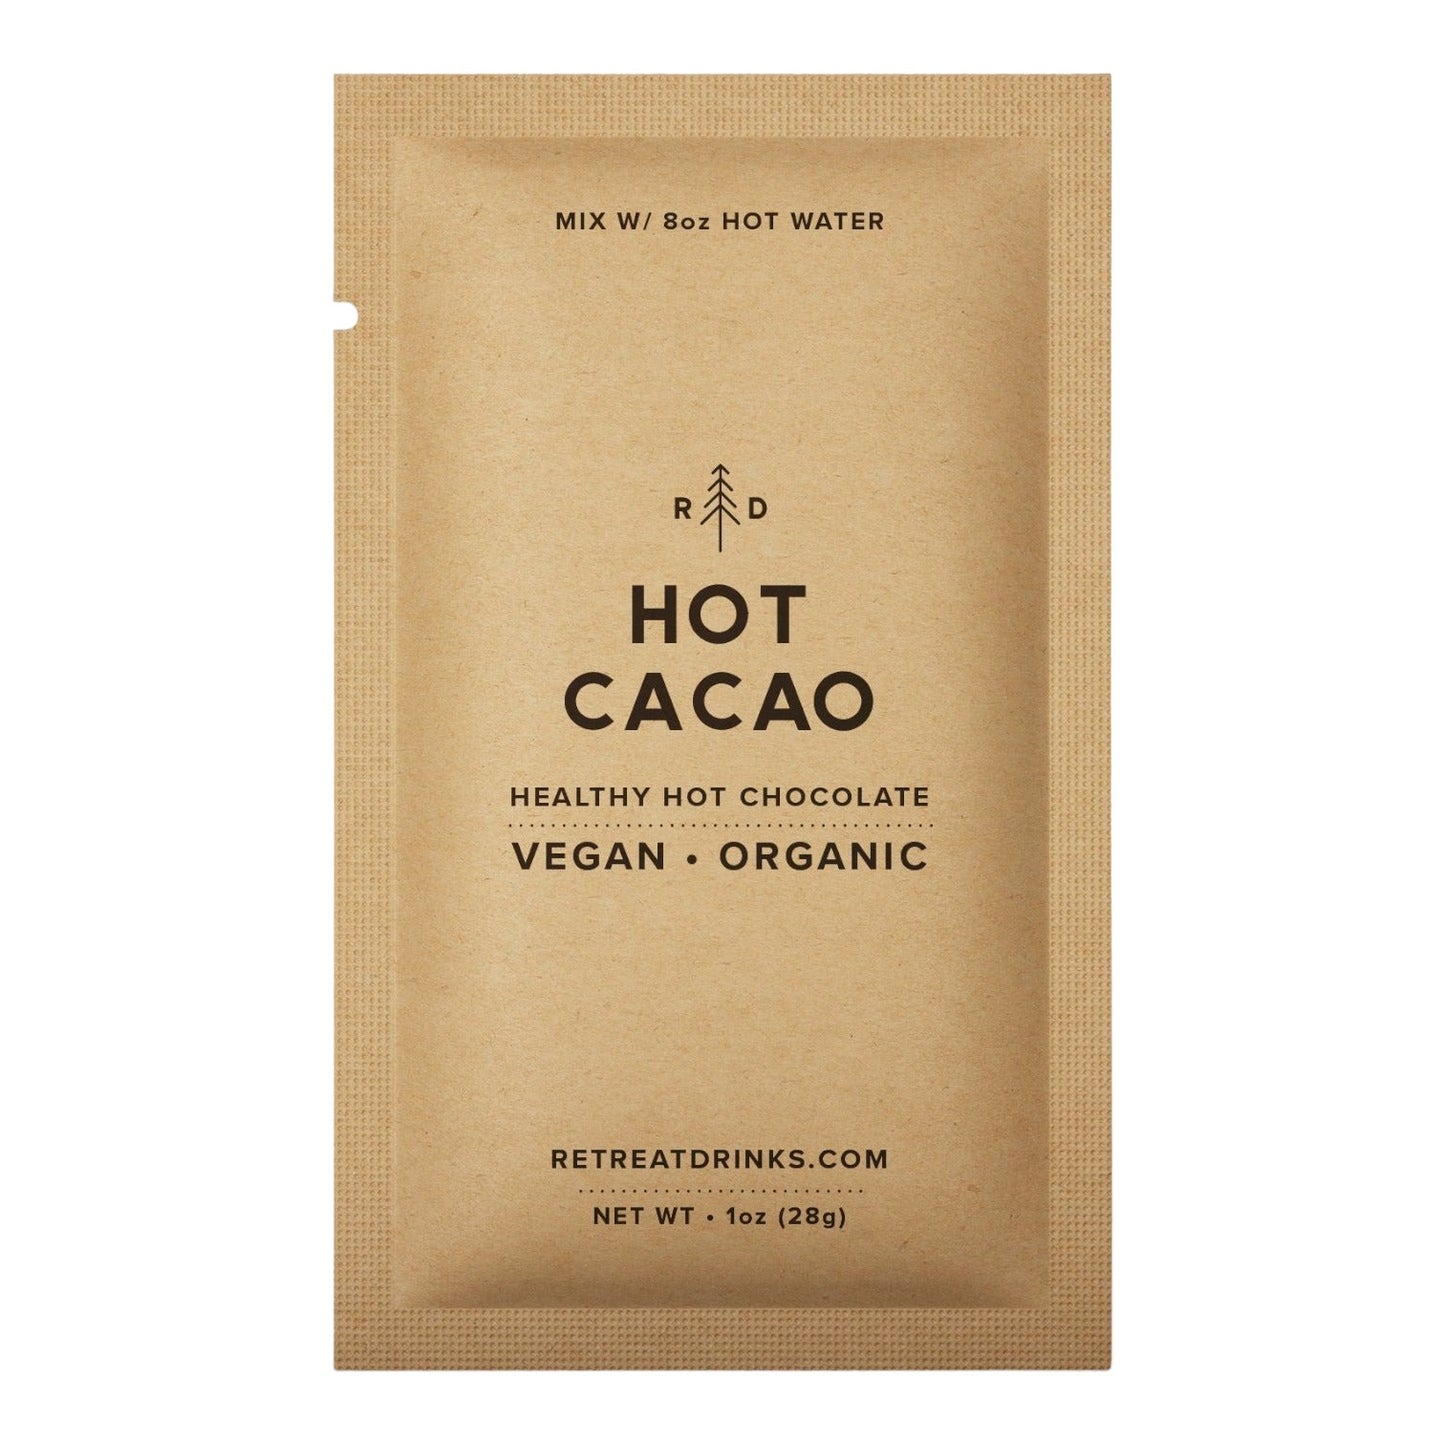 Single serving packet of vegan hot cacao mix from Retreat Drinks